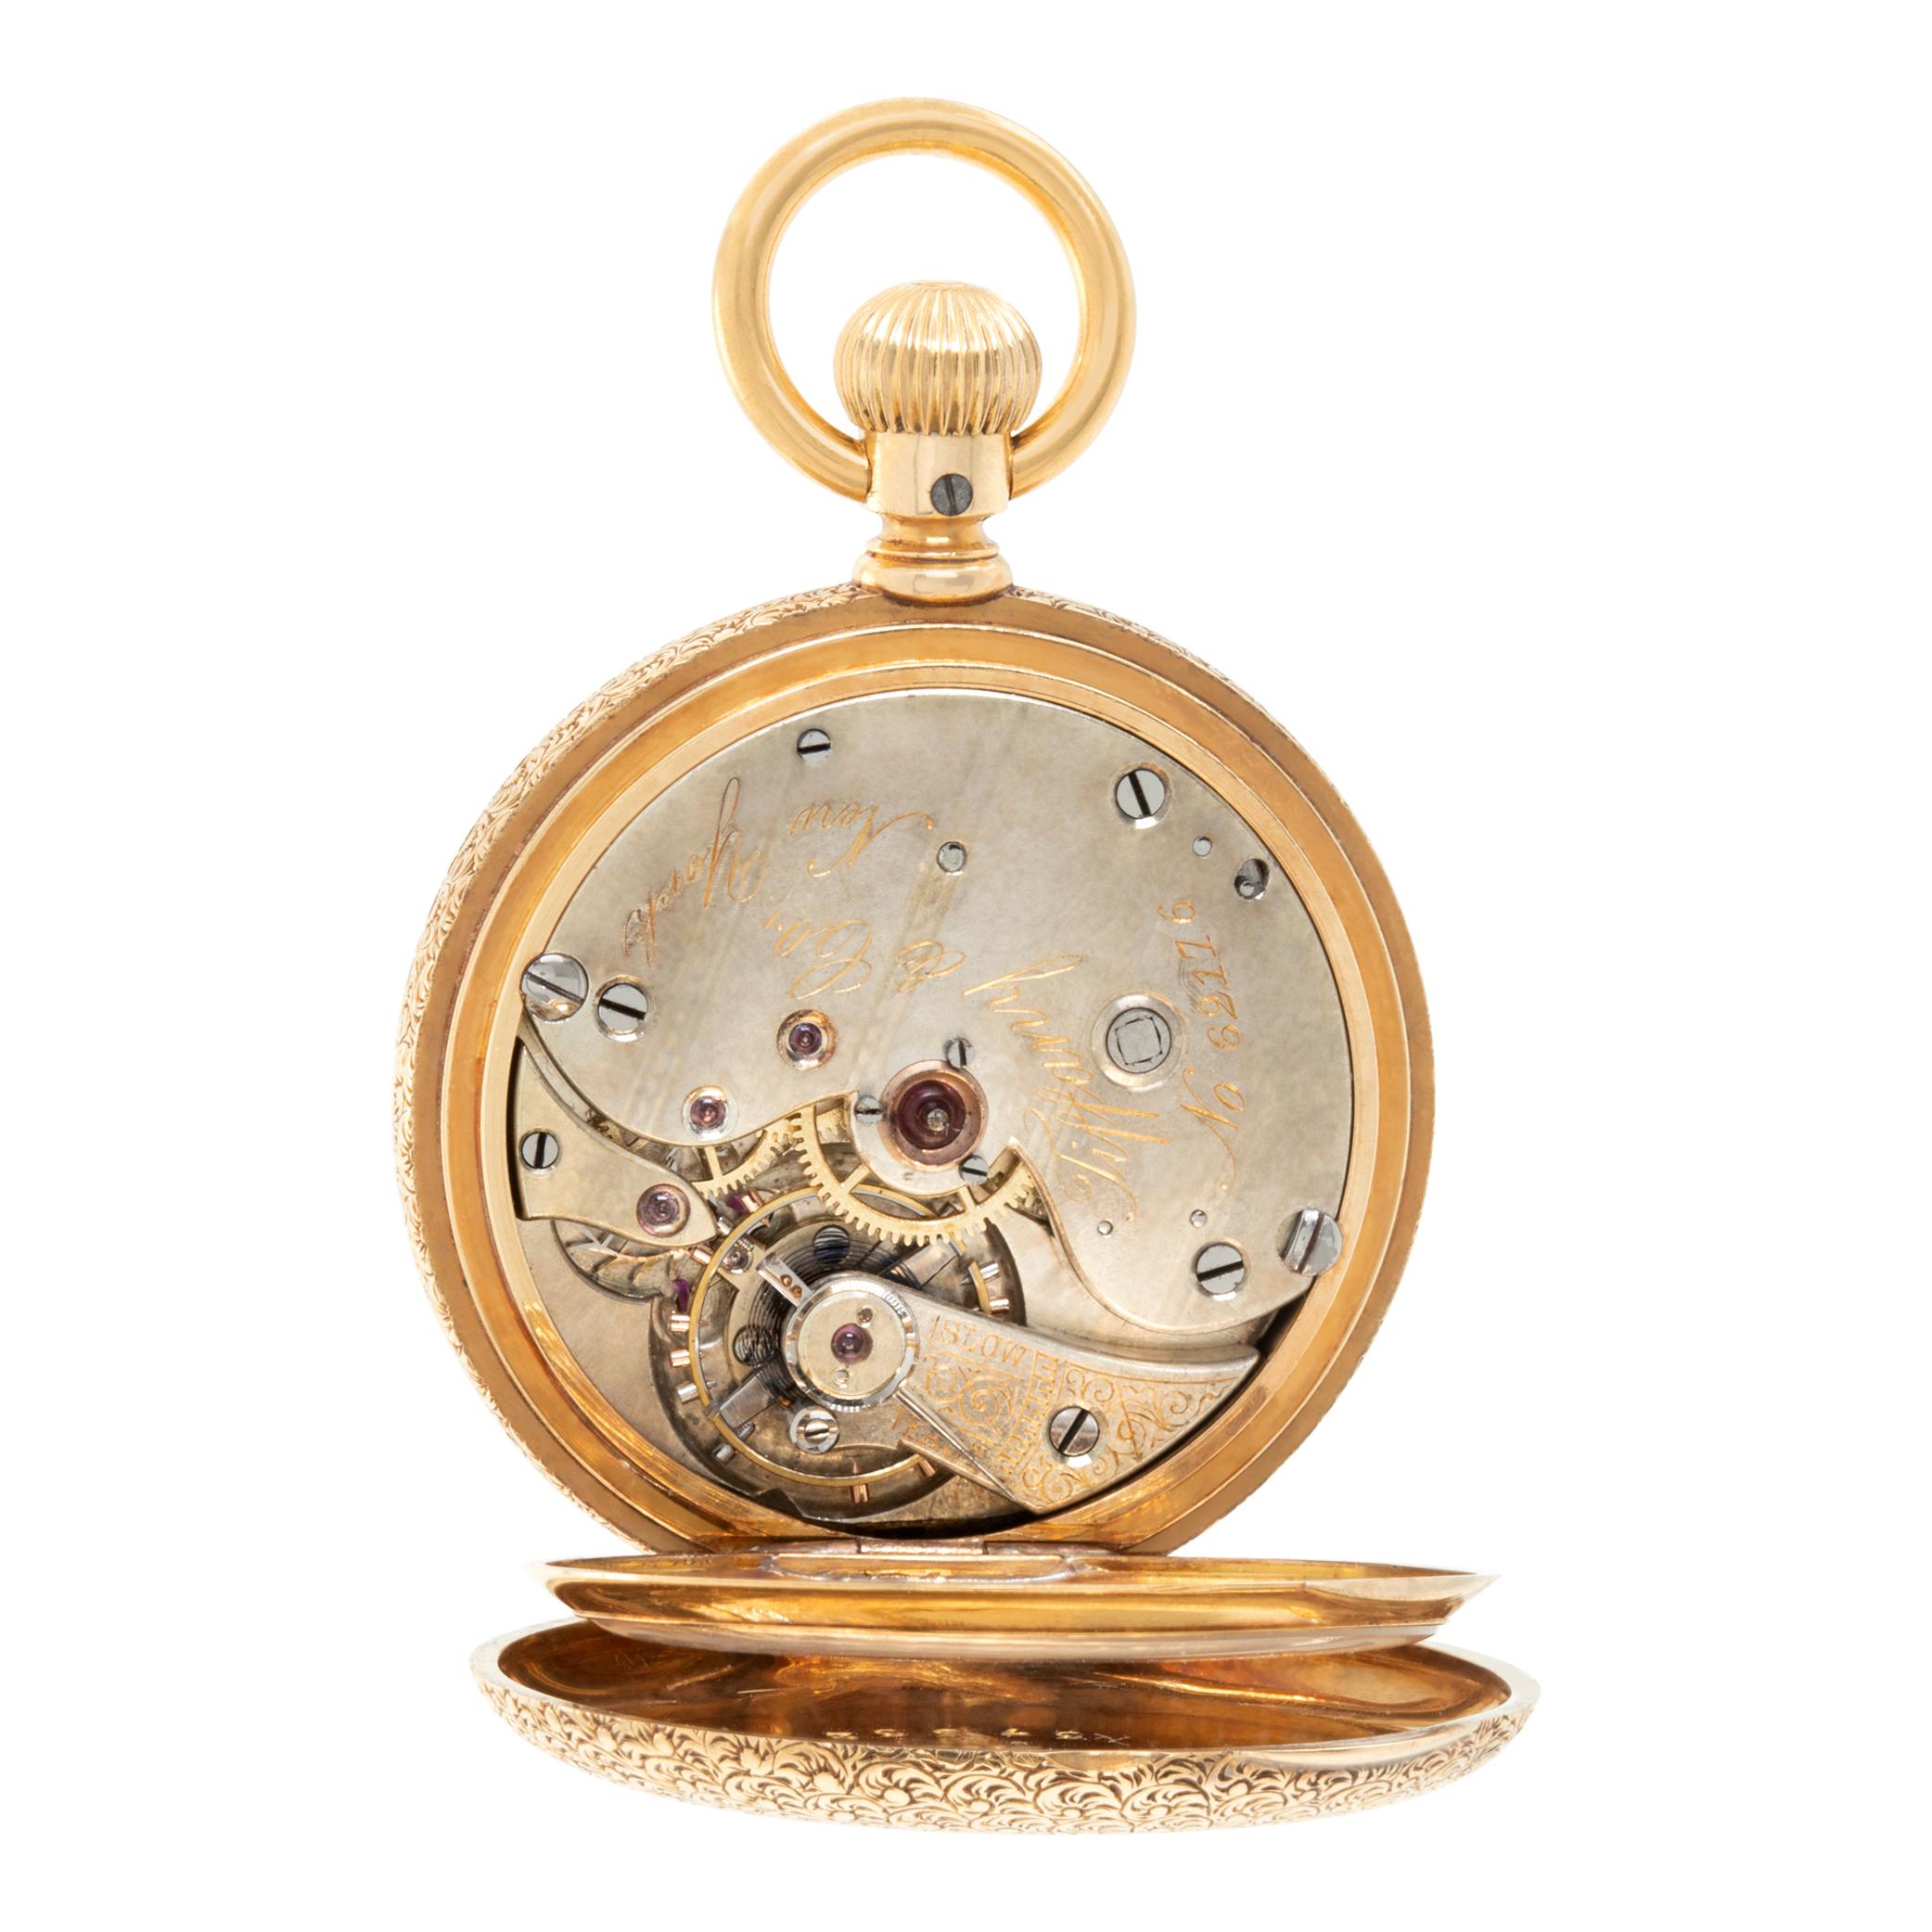 Tiffany & Co. 18k yellow gold Manual pocket watch For Sale 1